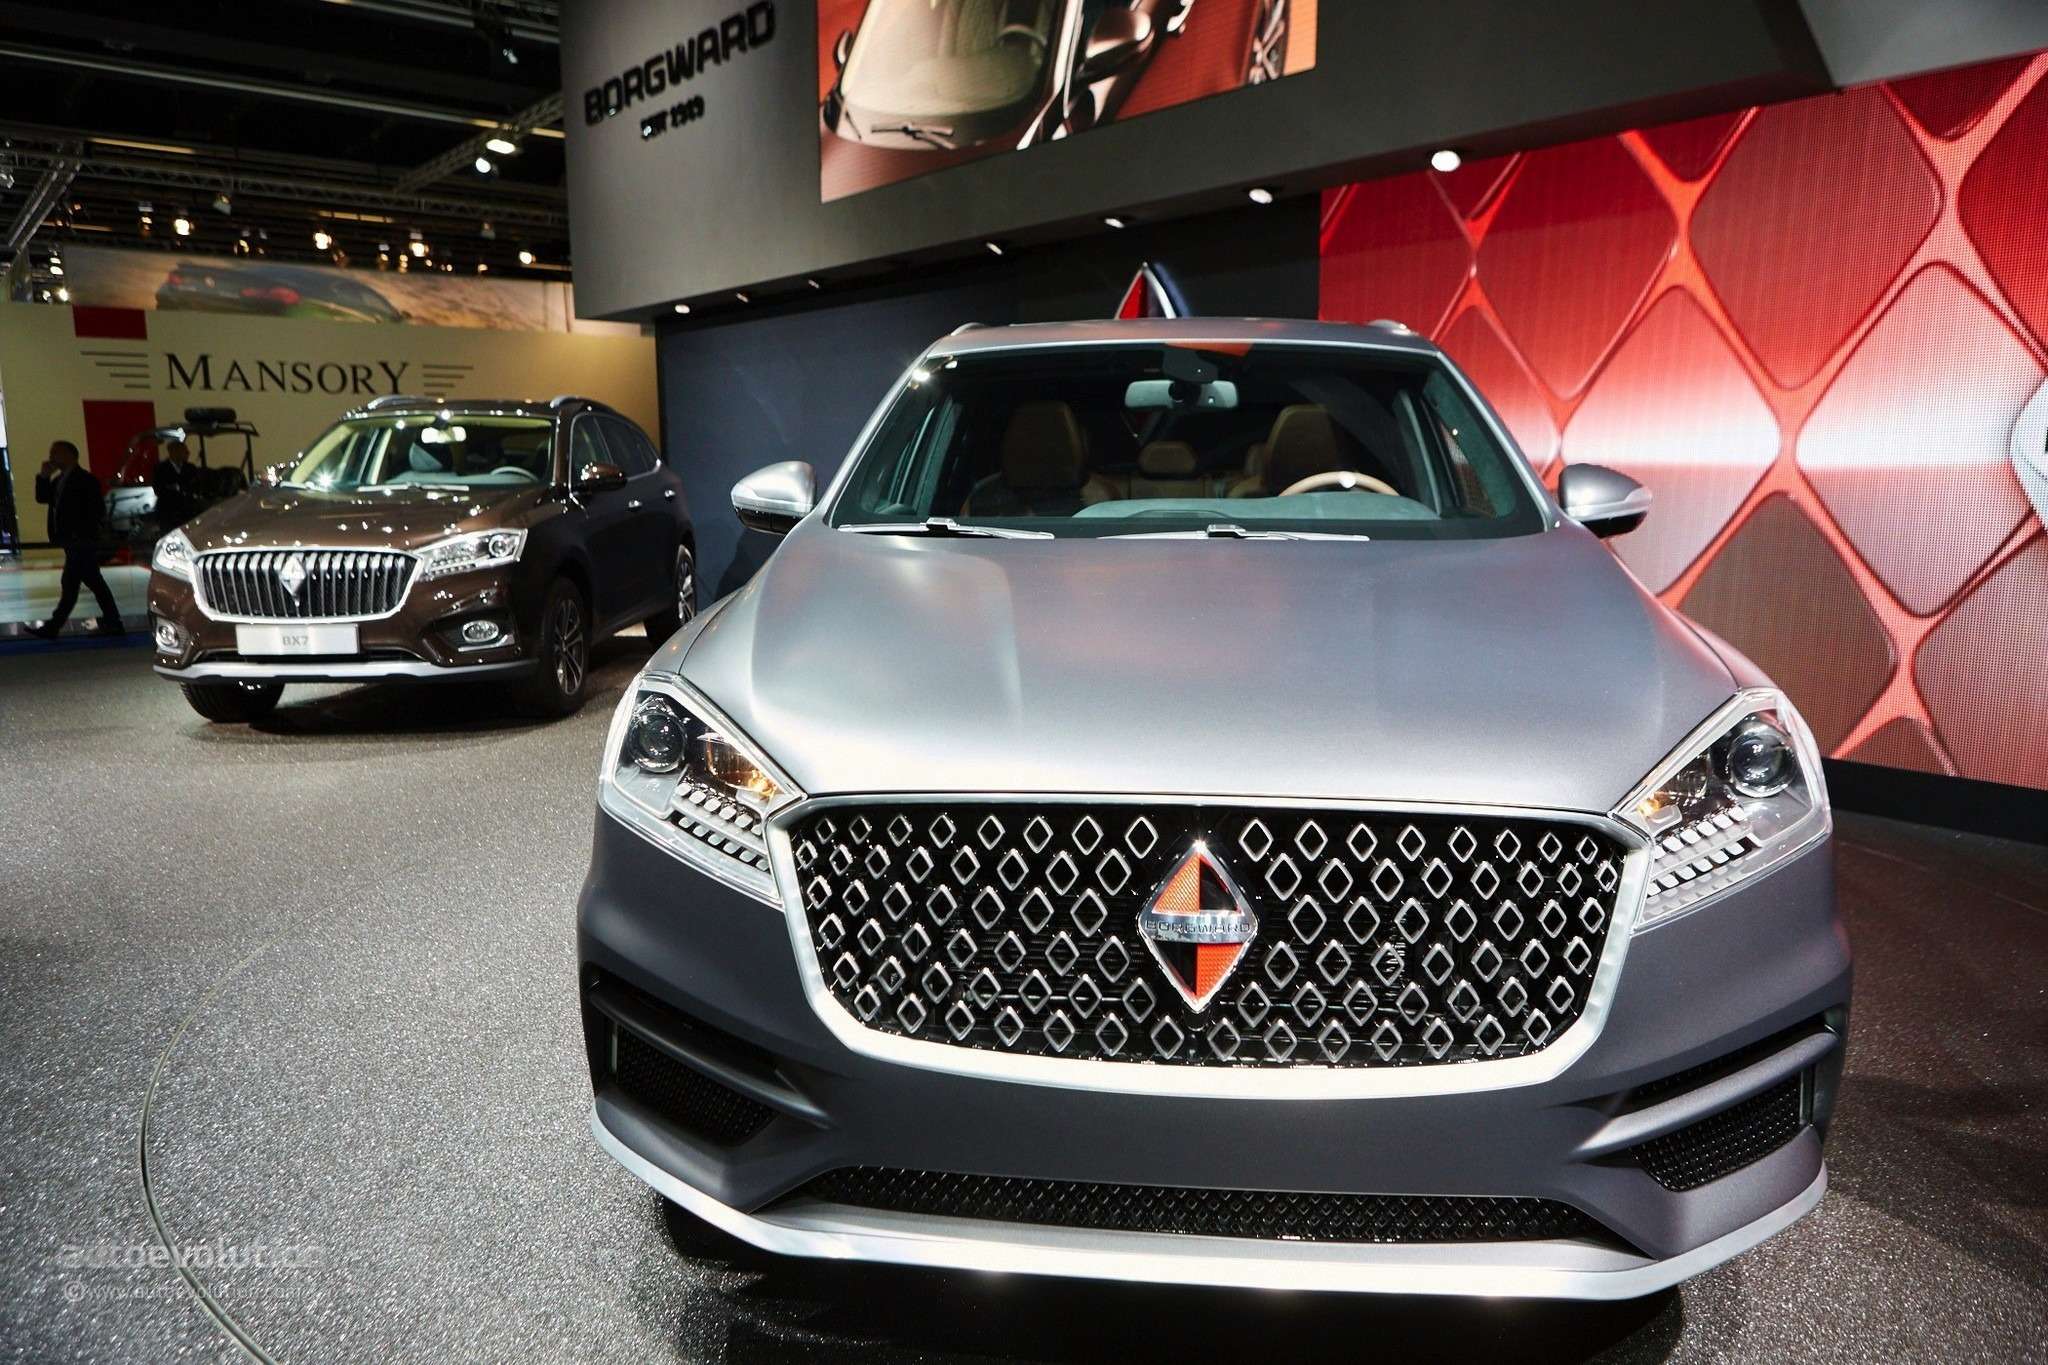 borgward-is-officially-back-with-its-bx7-suv-in-frankfurt-live-photos_21